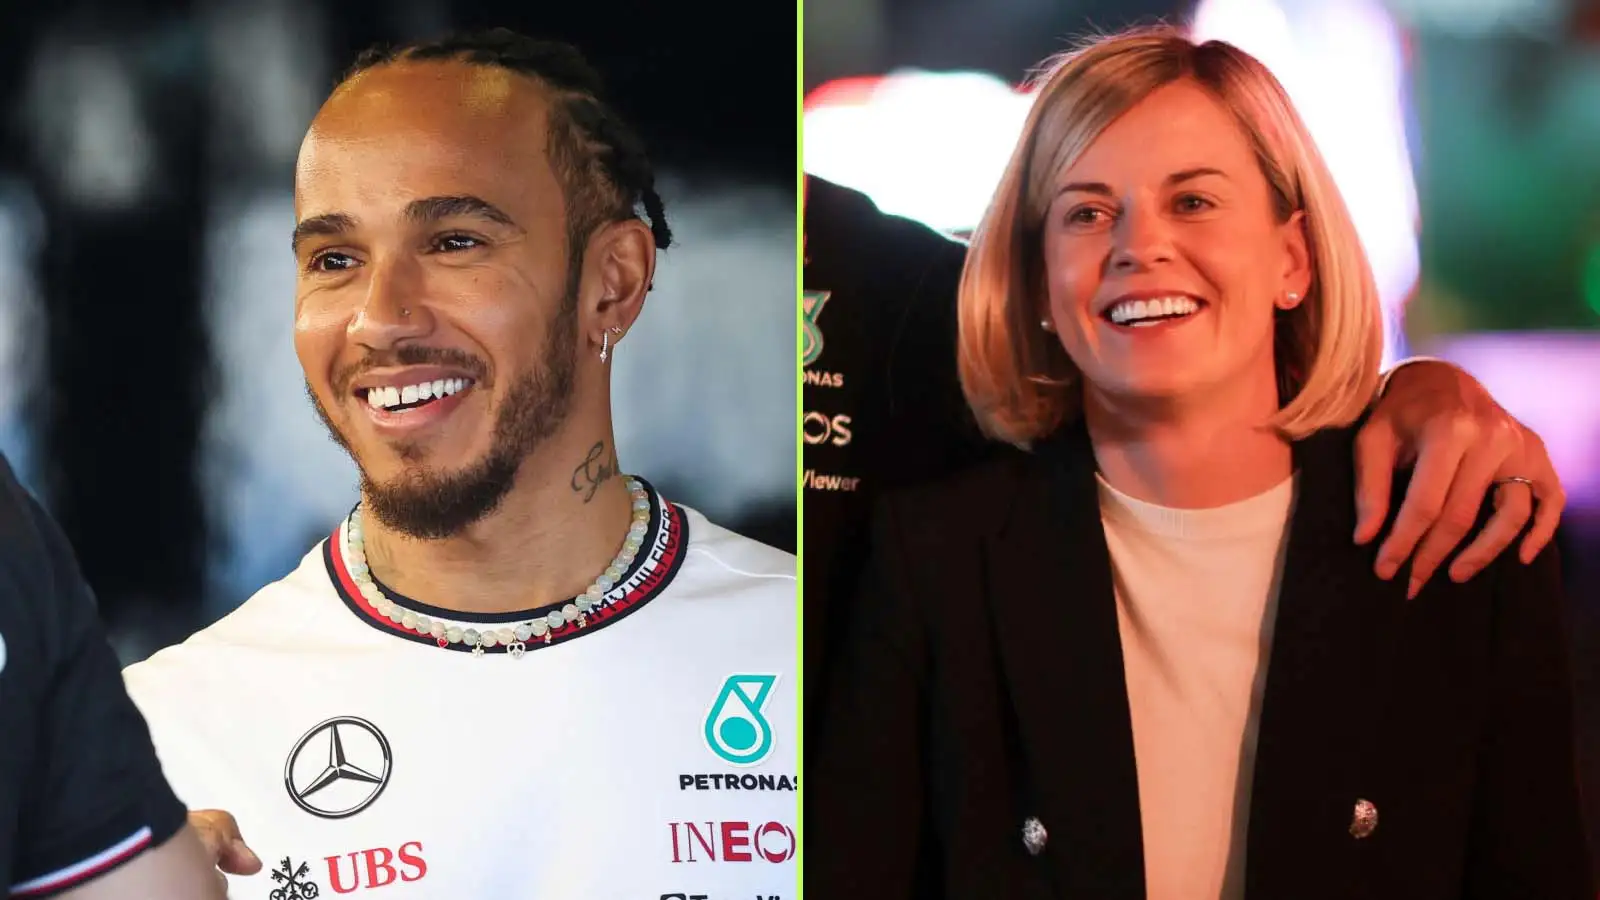 Lewis Hamilton and Susie Wolff.